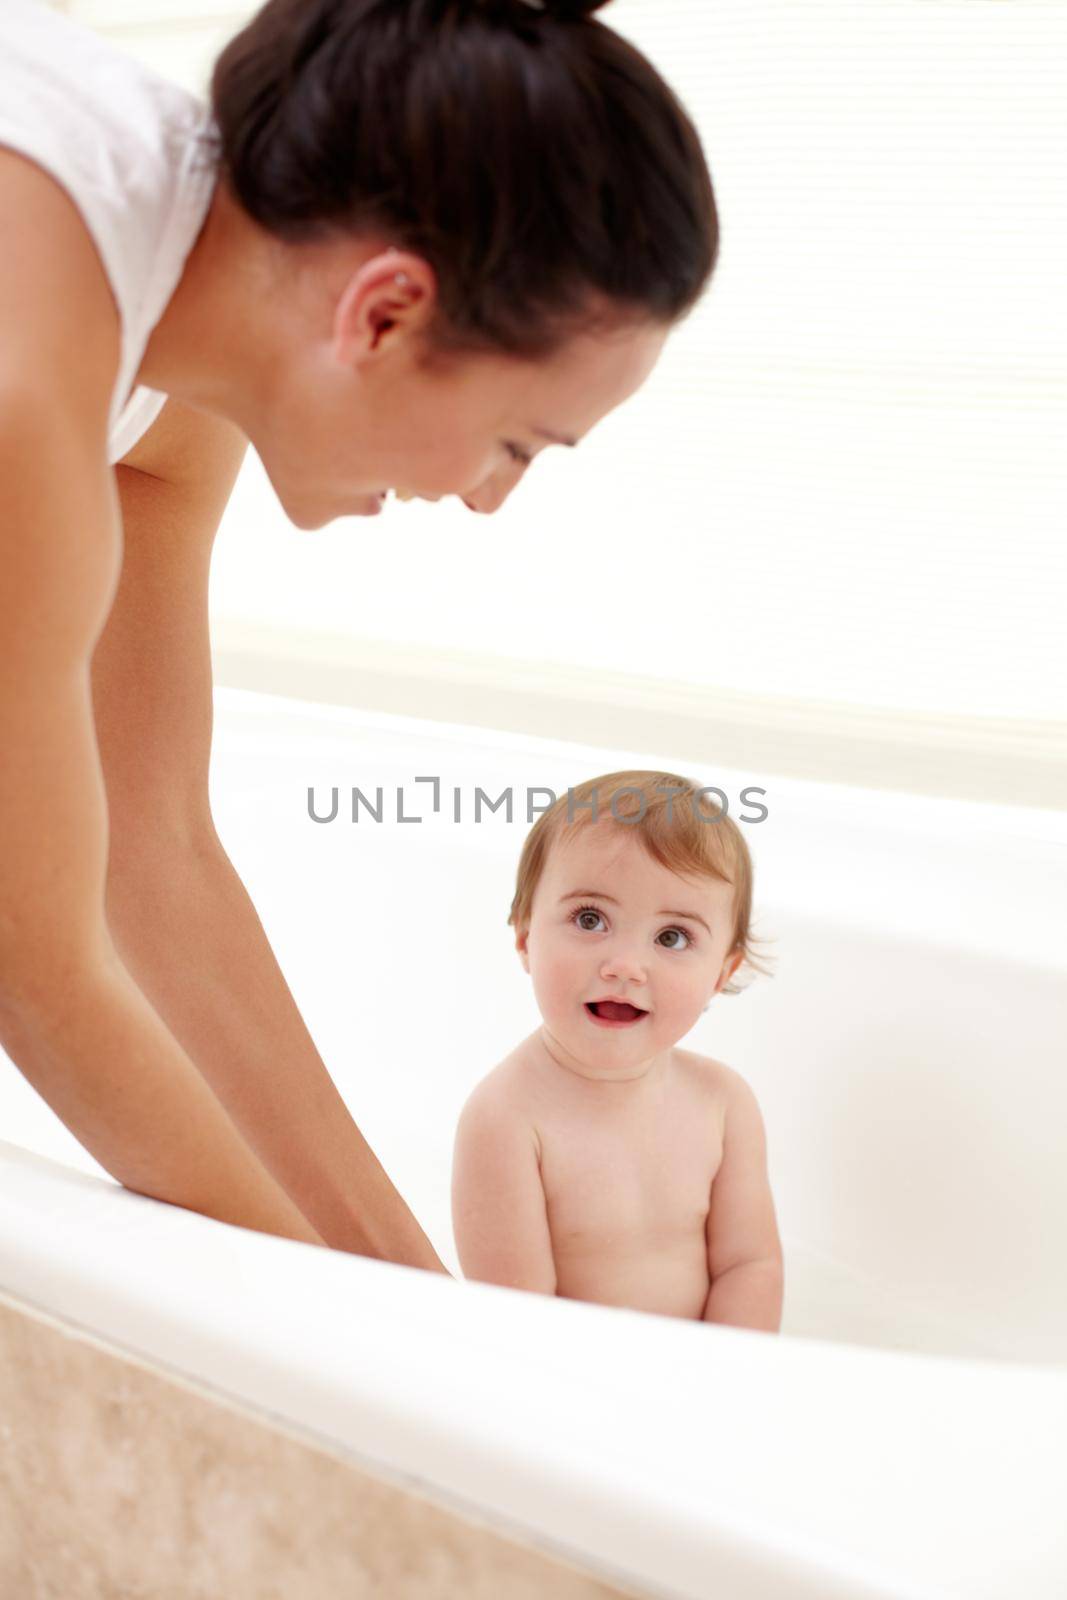 Her favorite time of day. A mother washing her adorable baby girl in the bath